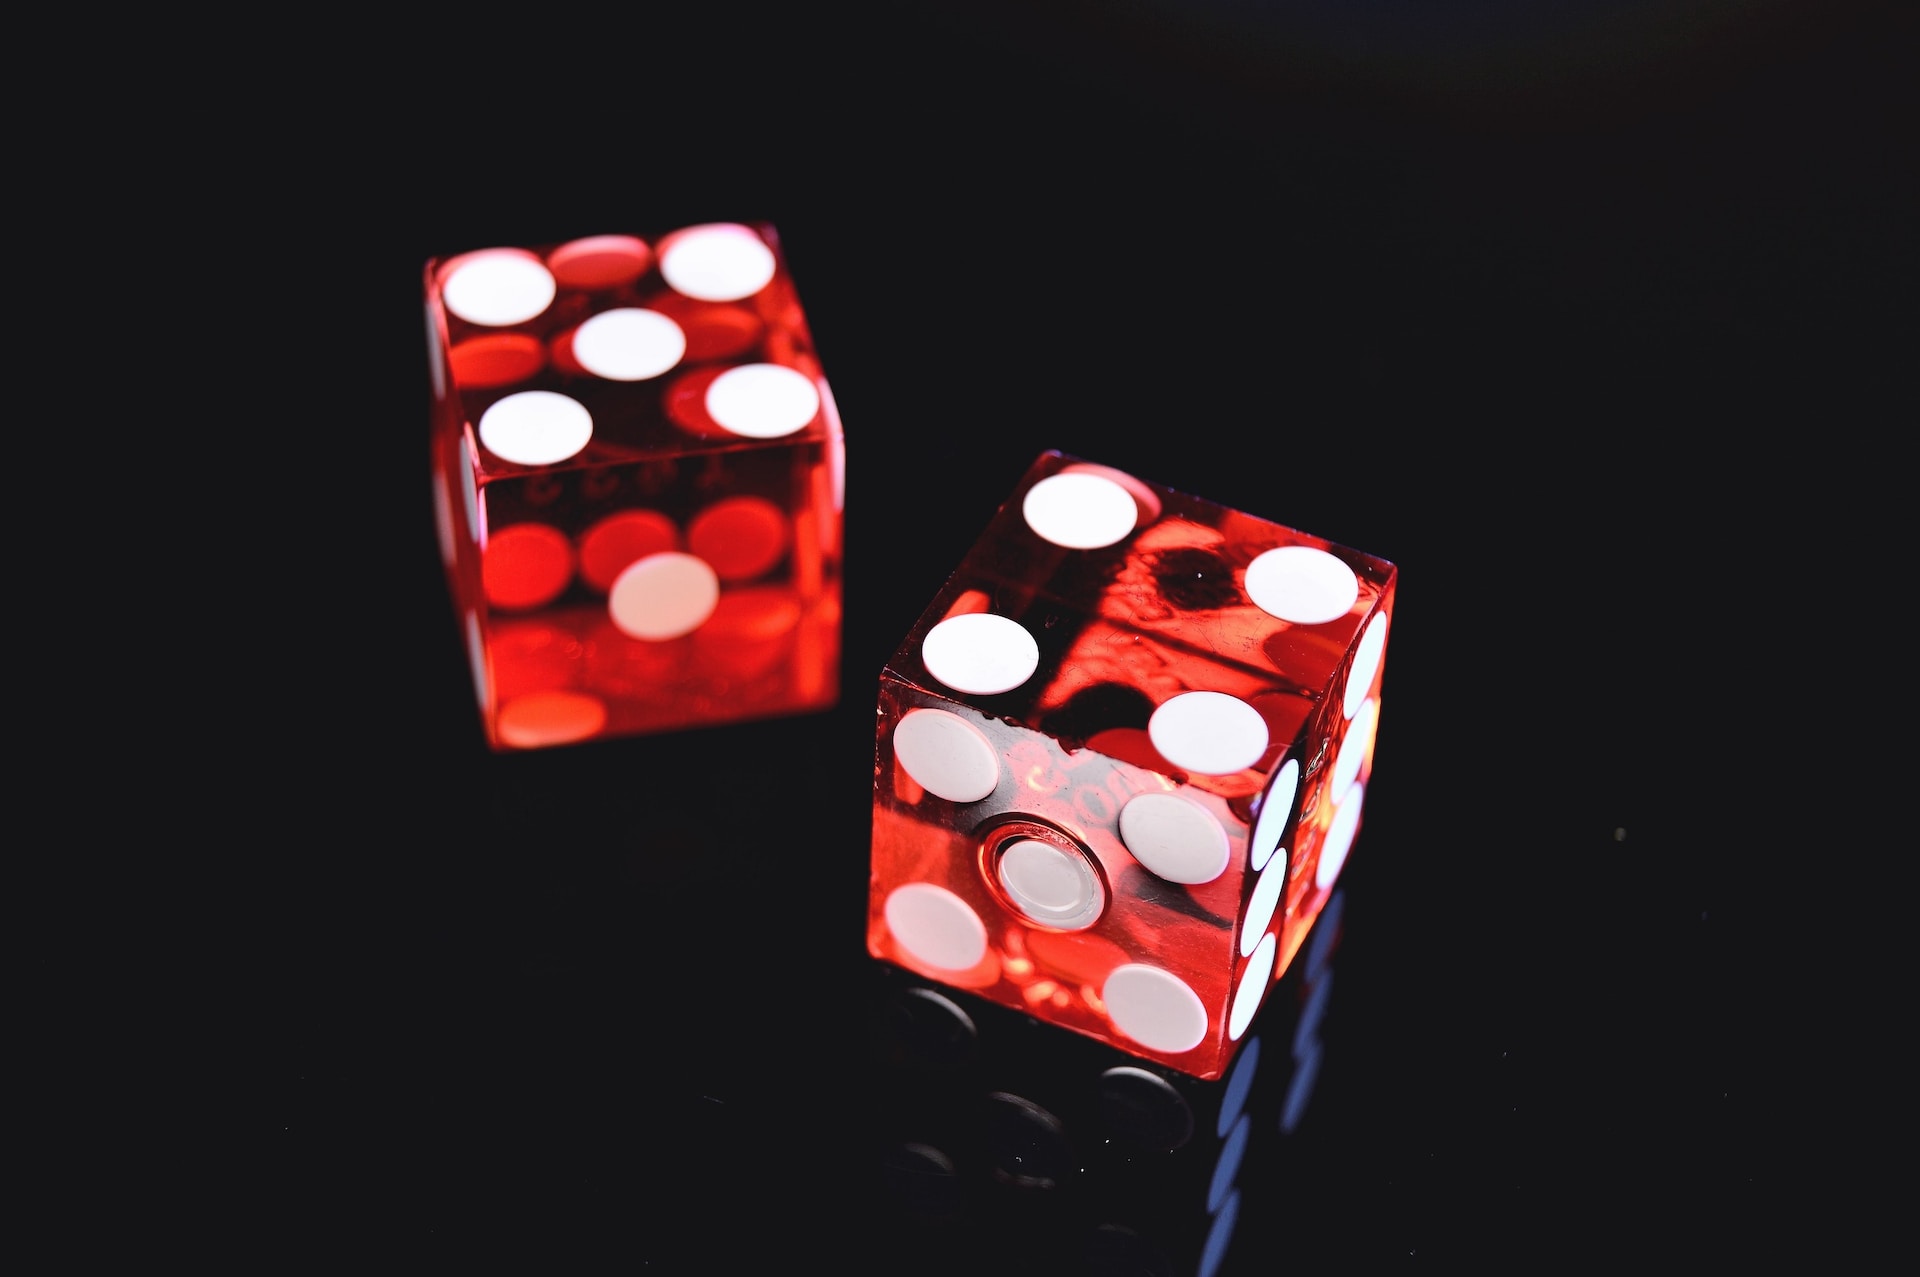 Two transparent red dice against a black background, showing five and four